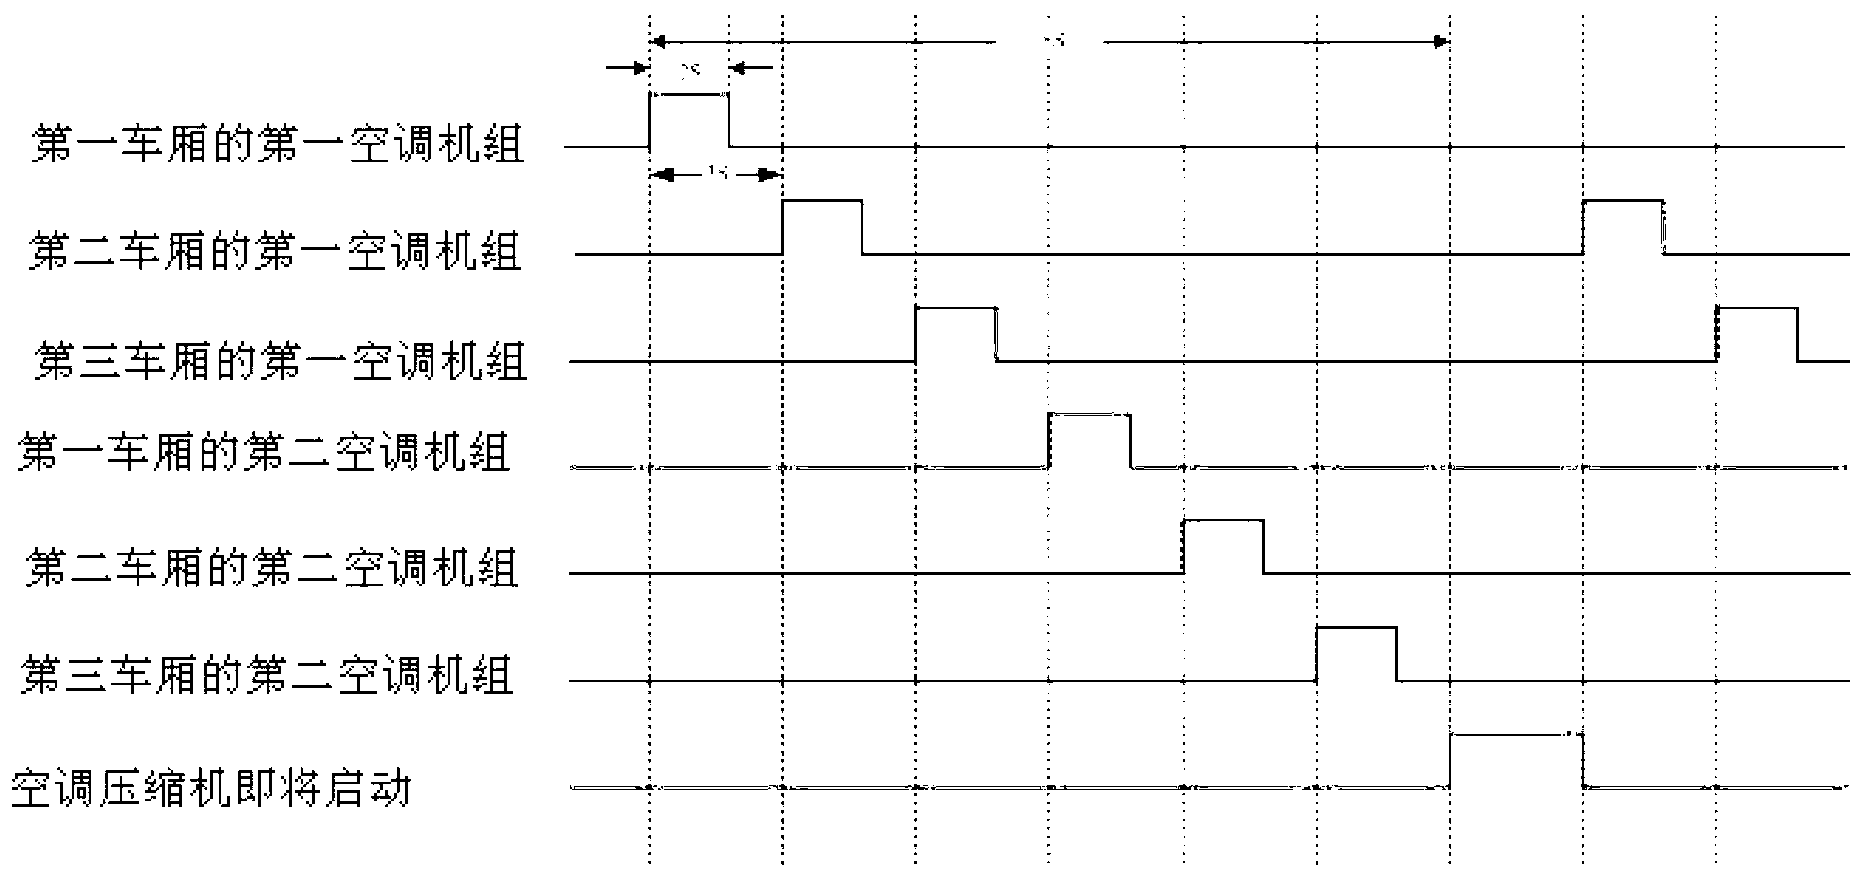 Train network control method of air condition compressors